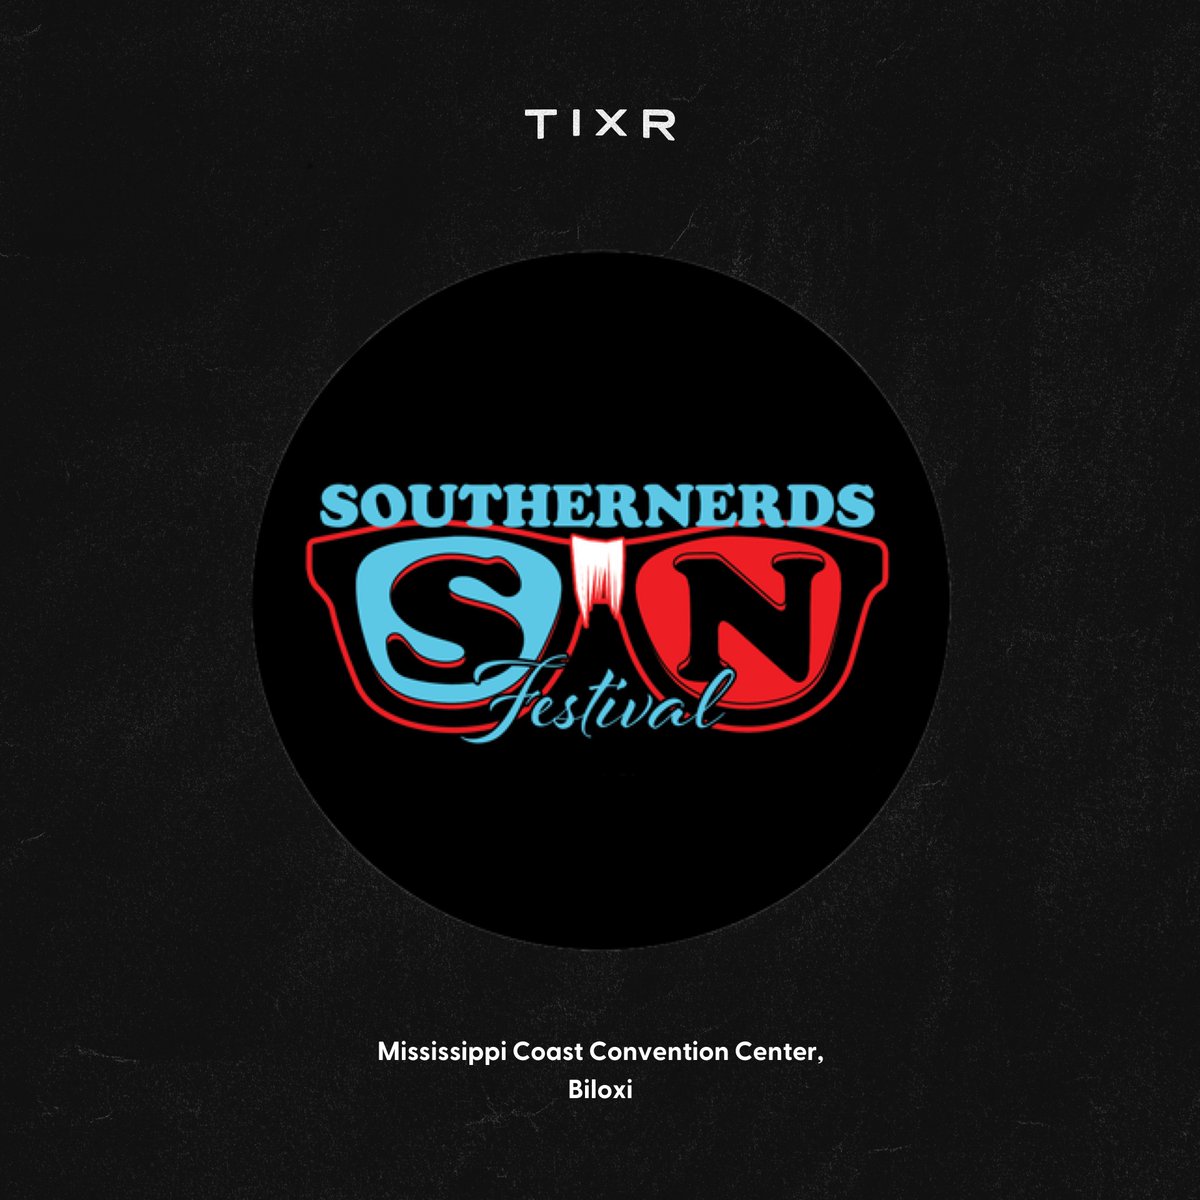 The Southernerds Festival is hosting a thrilling two-day affair at the Mississippi Coast Convention Center, promising a diverse list of guests, vendors, artists, fan groups, and more. tixr.com/groups/humbl3e…